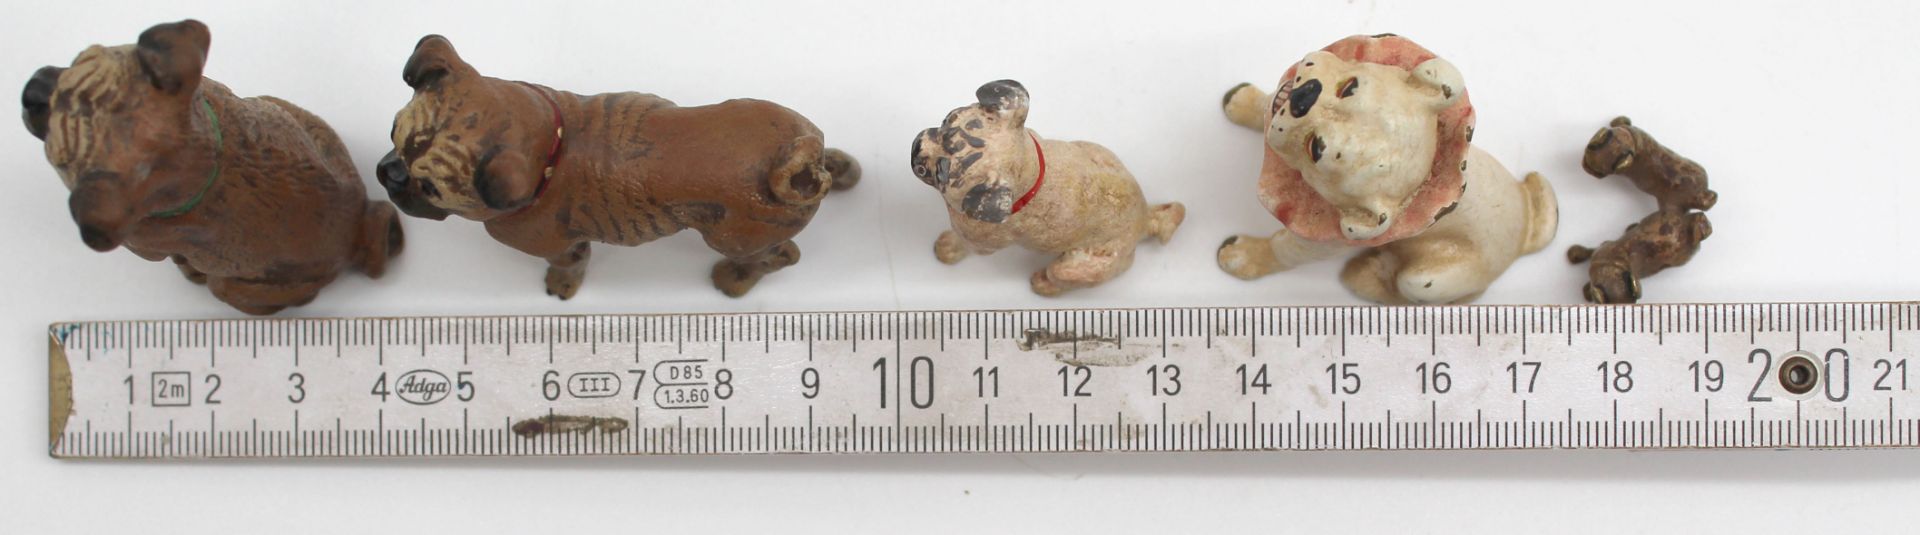 5 pugs. Cold painted bronze, Vienna? - Image 11 of 13